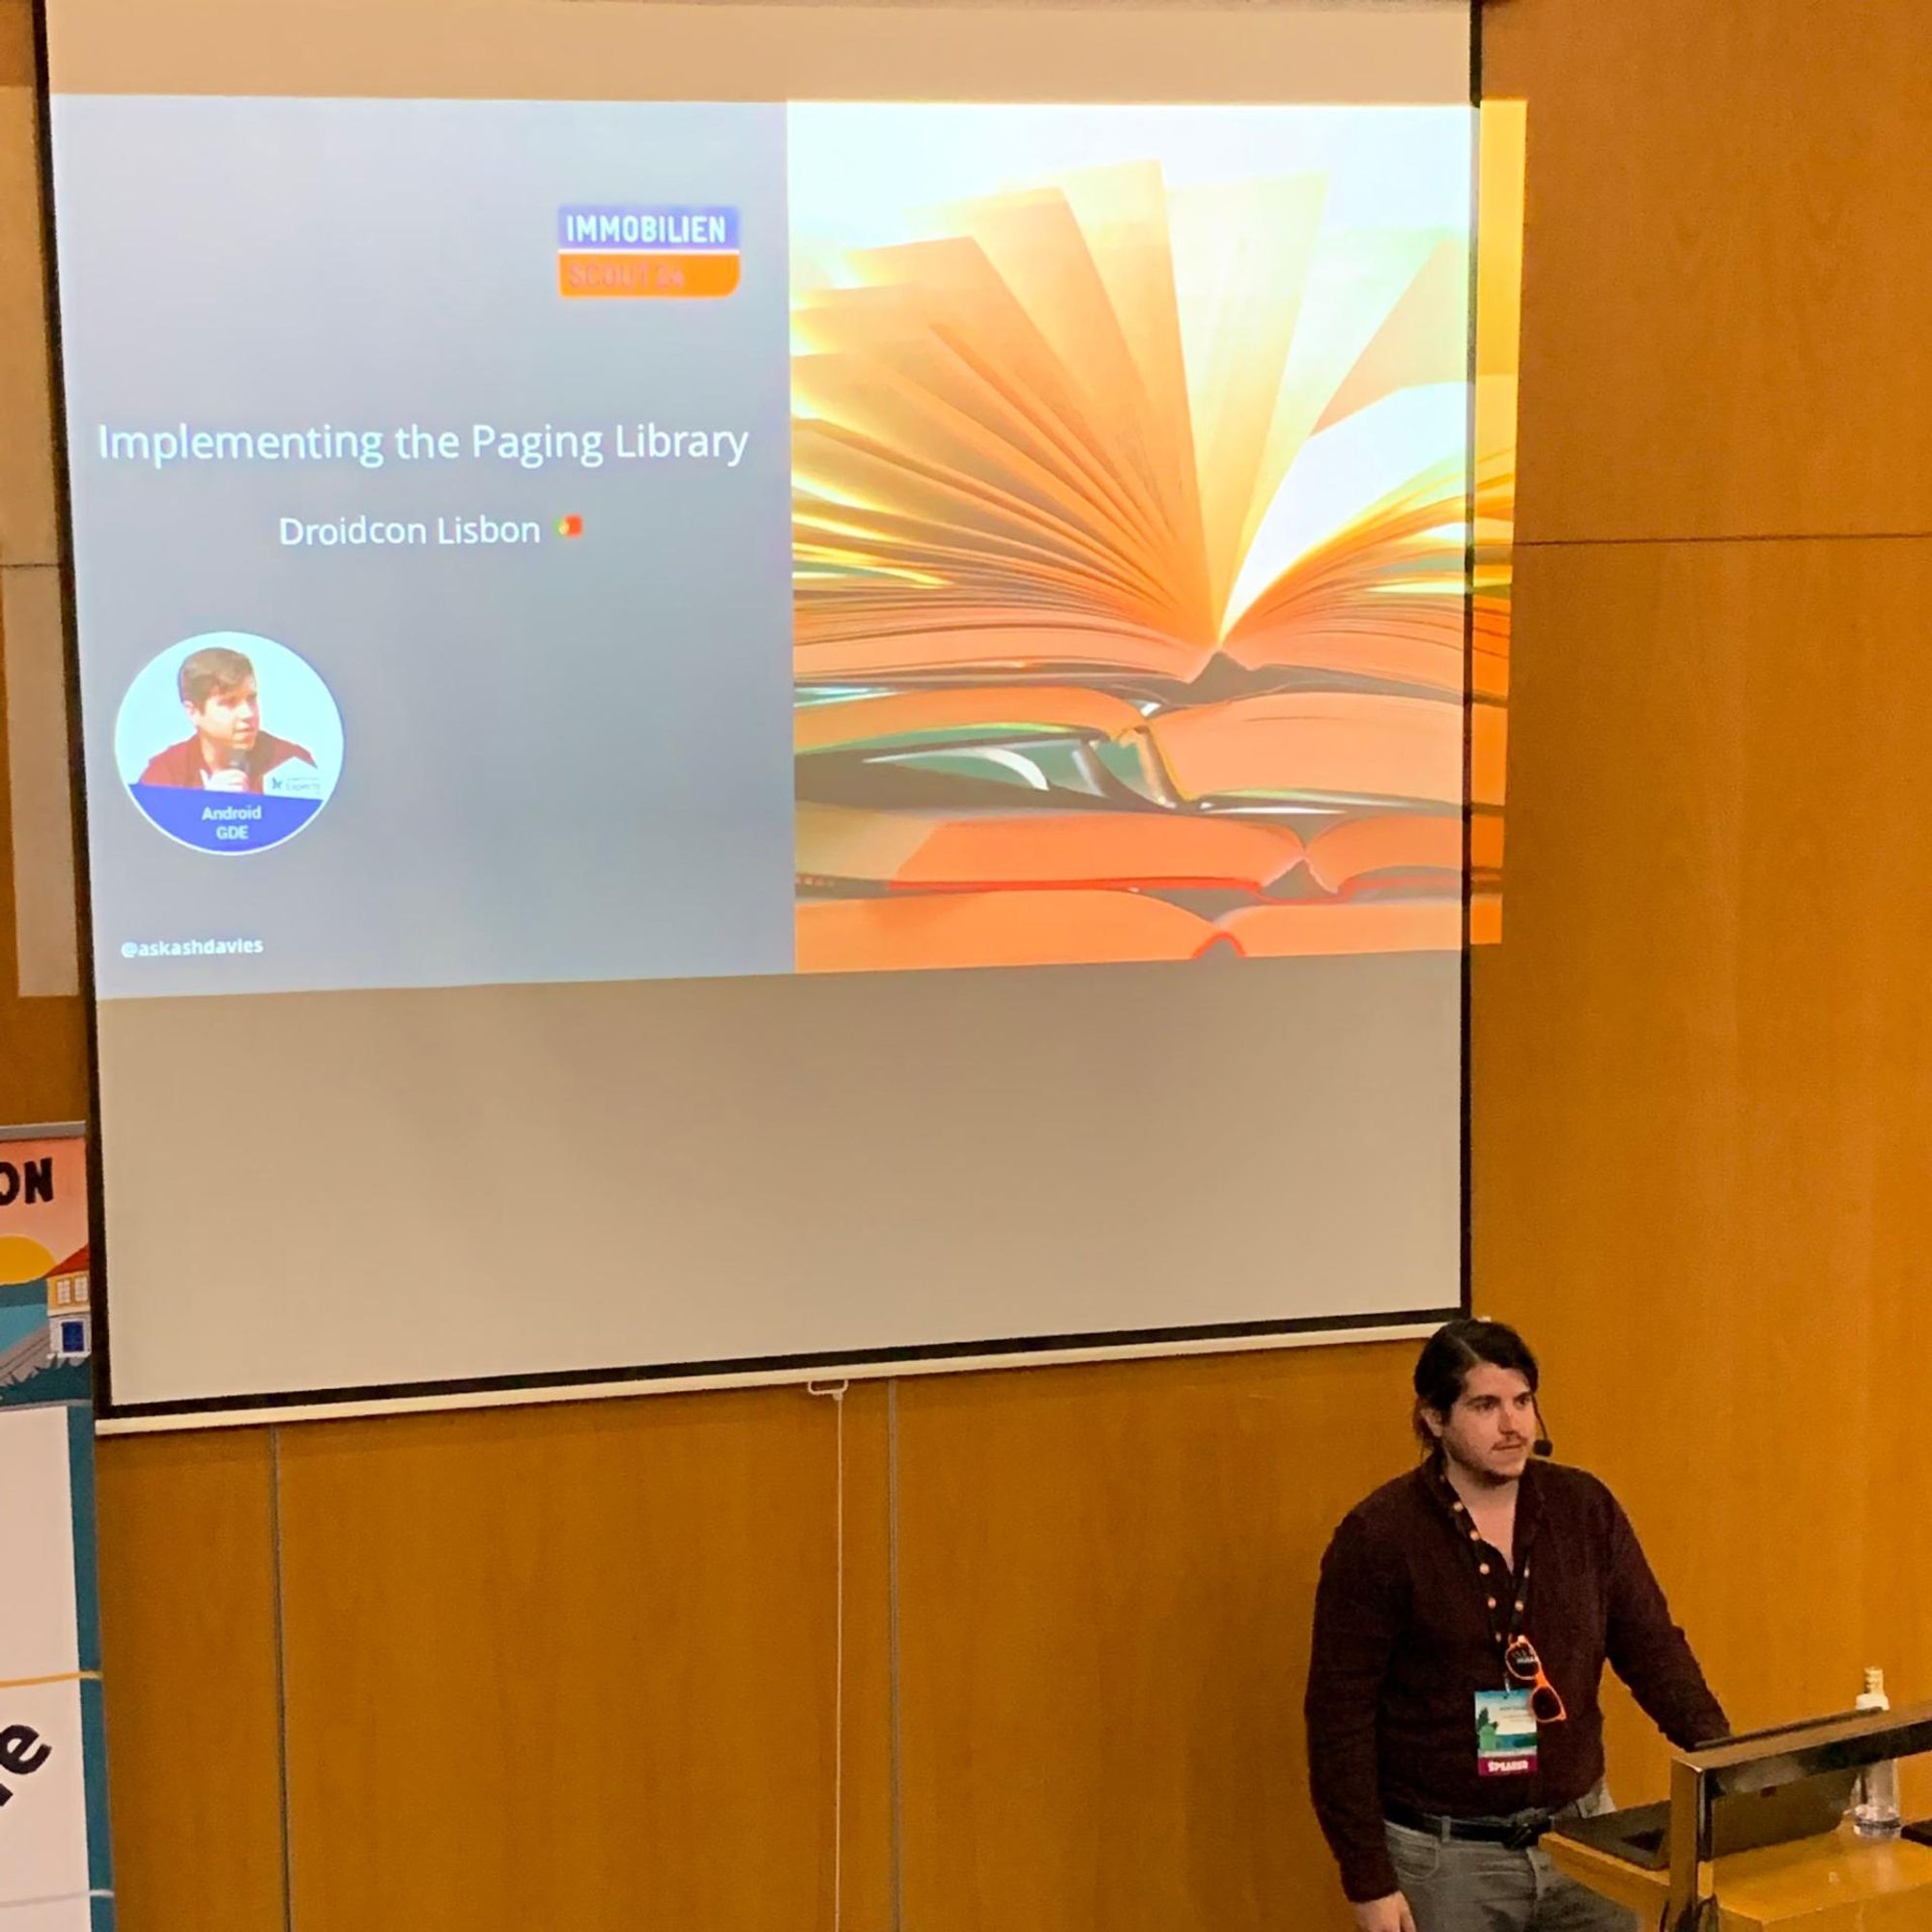 Droidcon Lisbon: Implementing the Paging Library